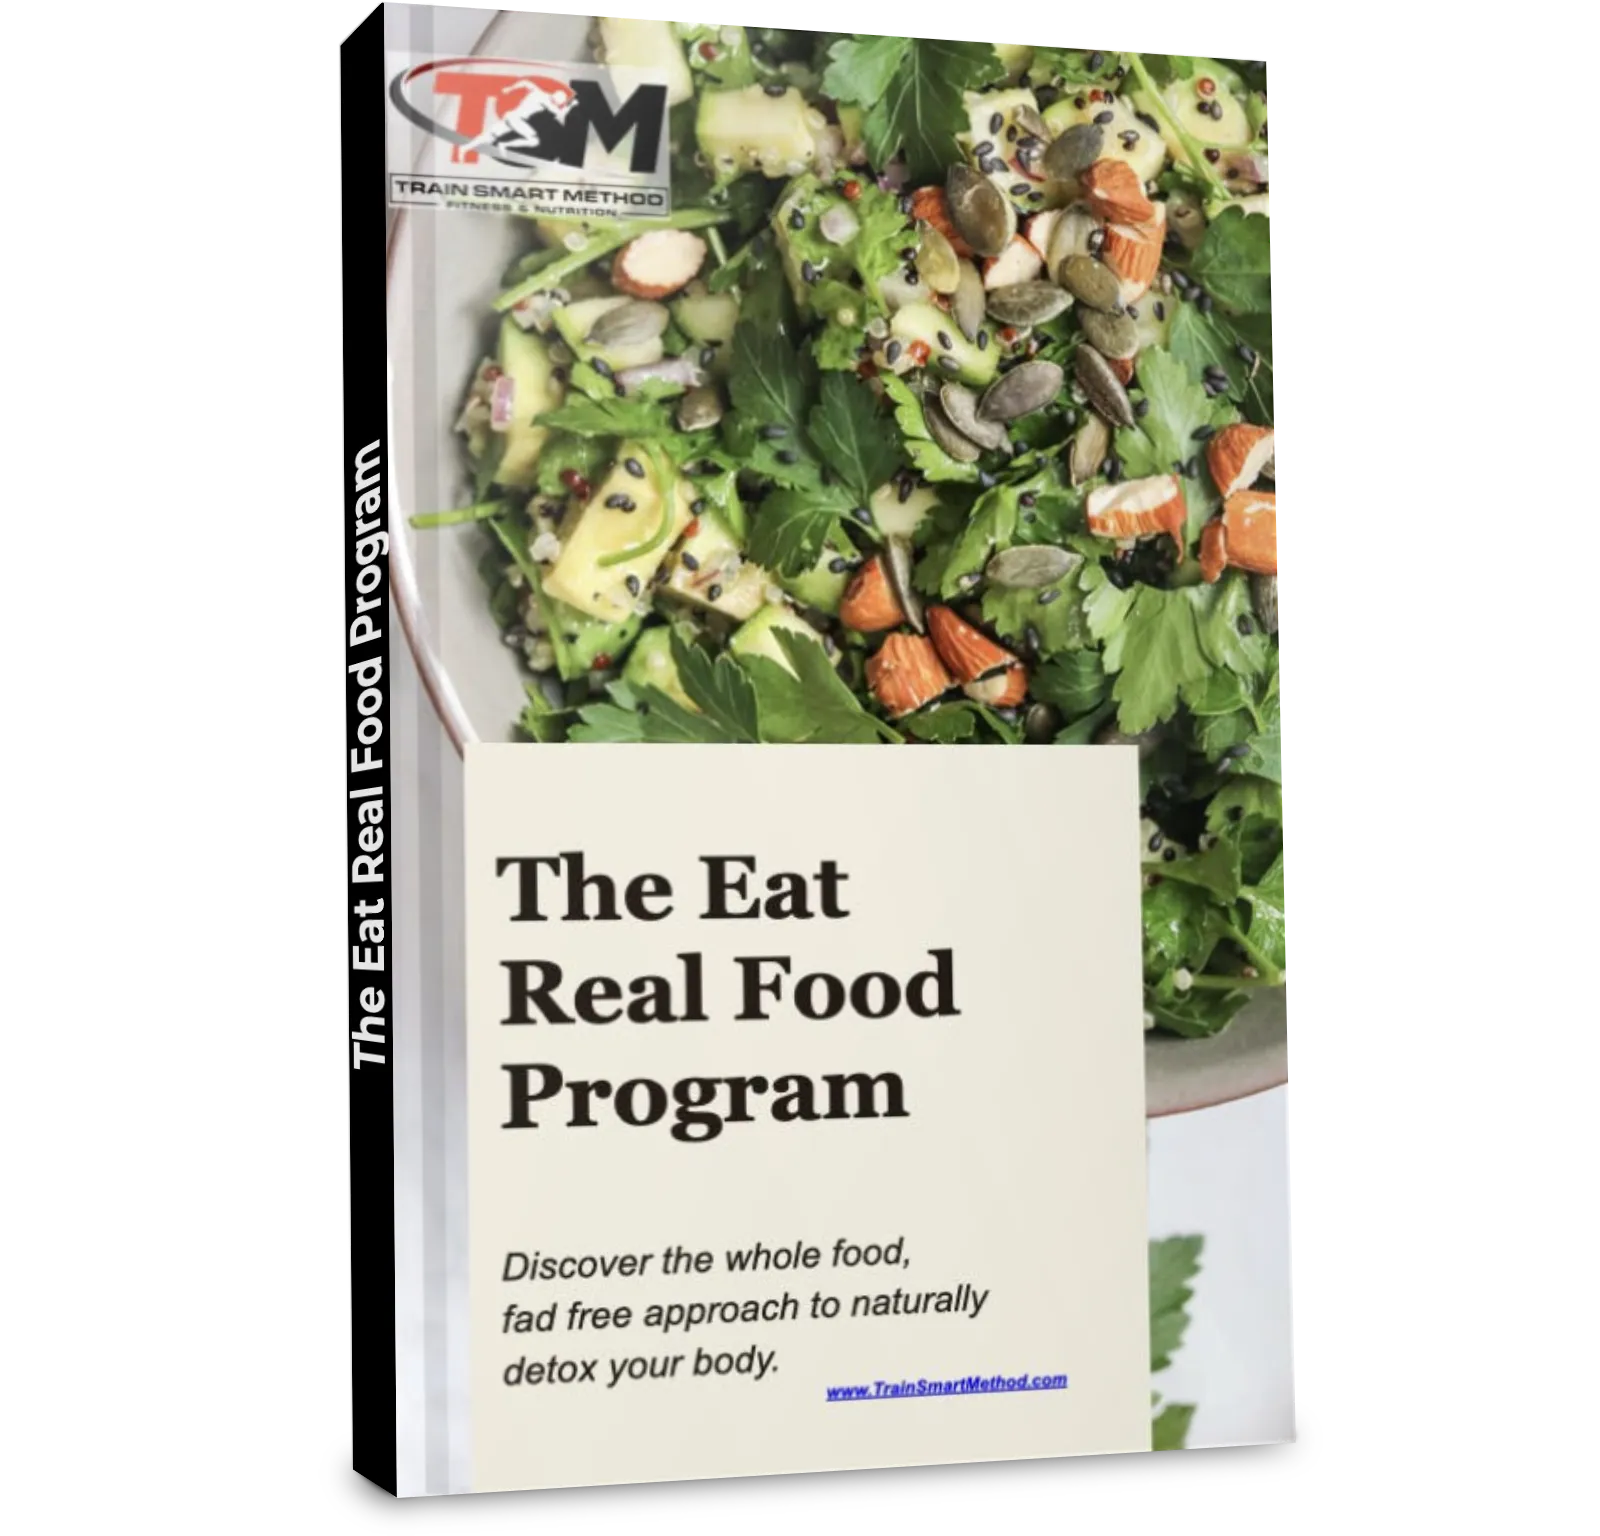 The Eat Real Food Program